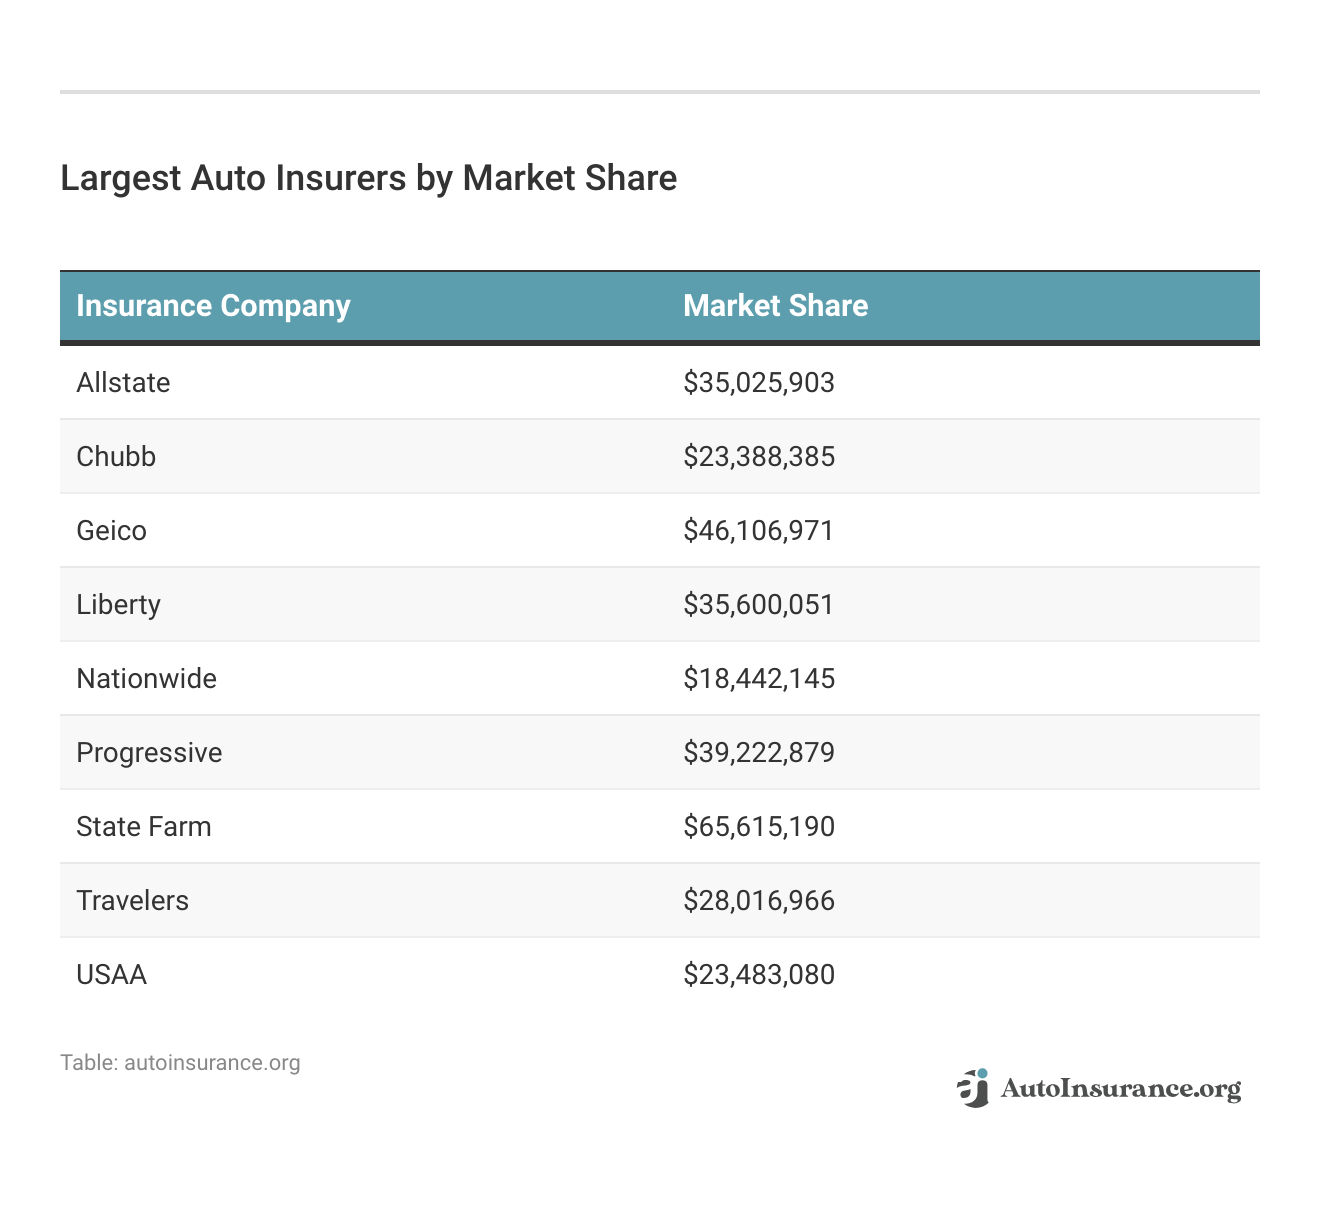 <h3>Largest Auto Insurers by Market Share</h3>